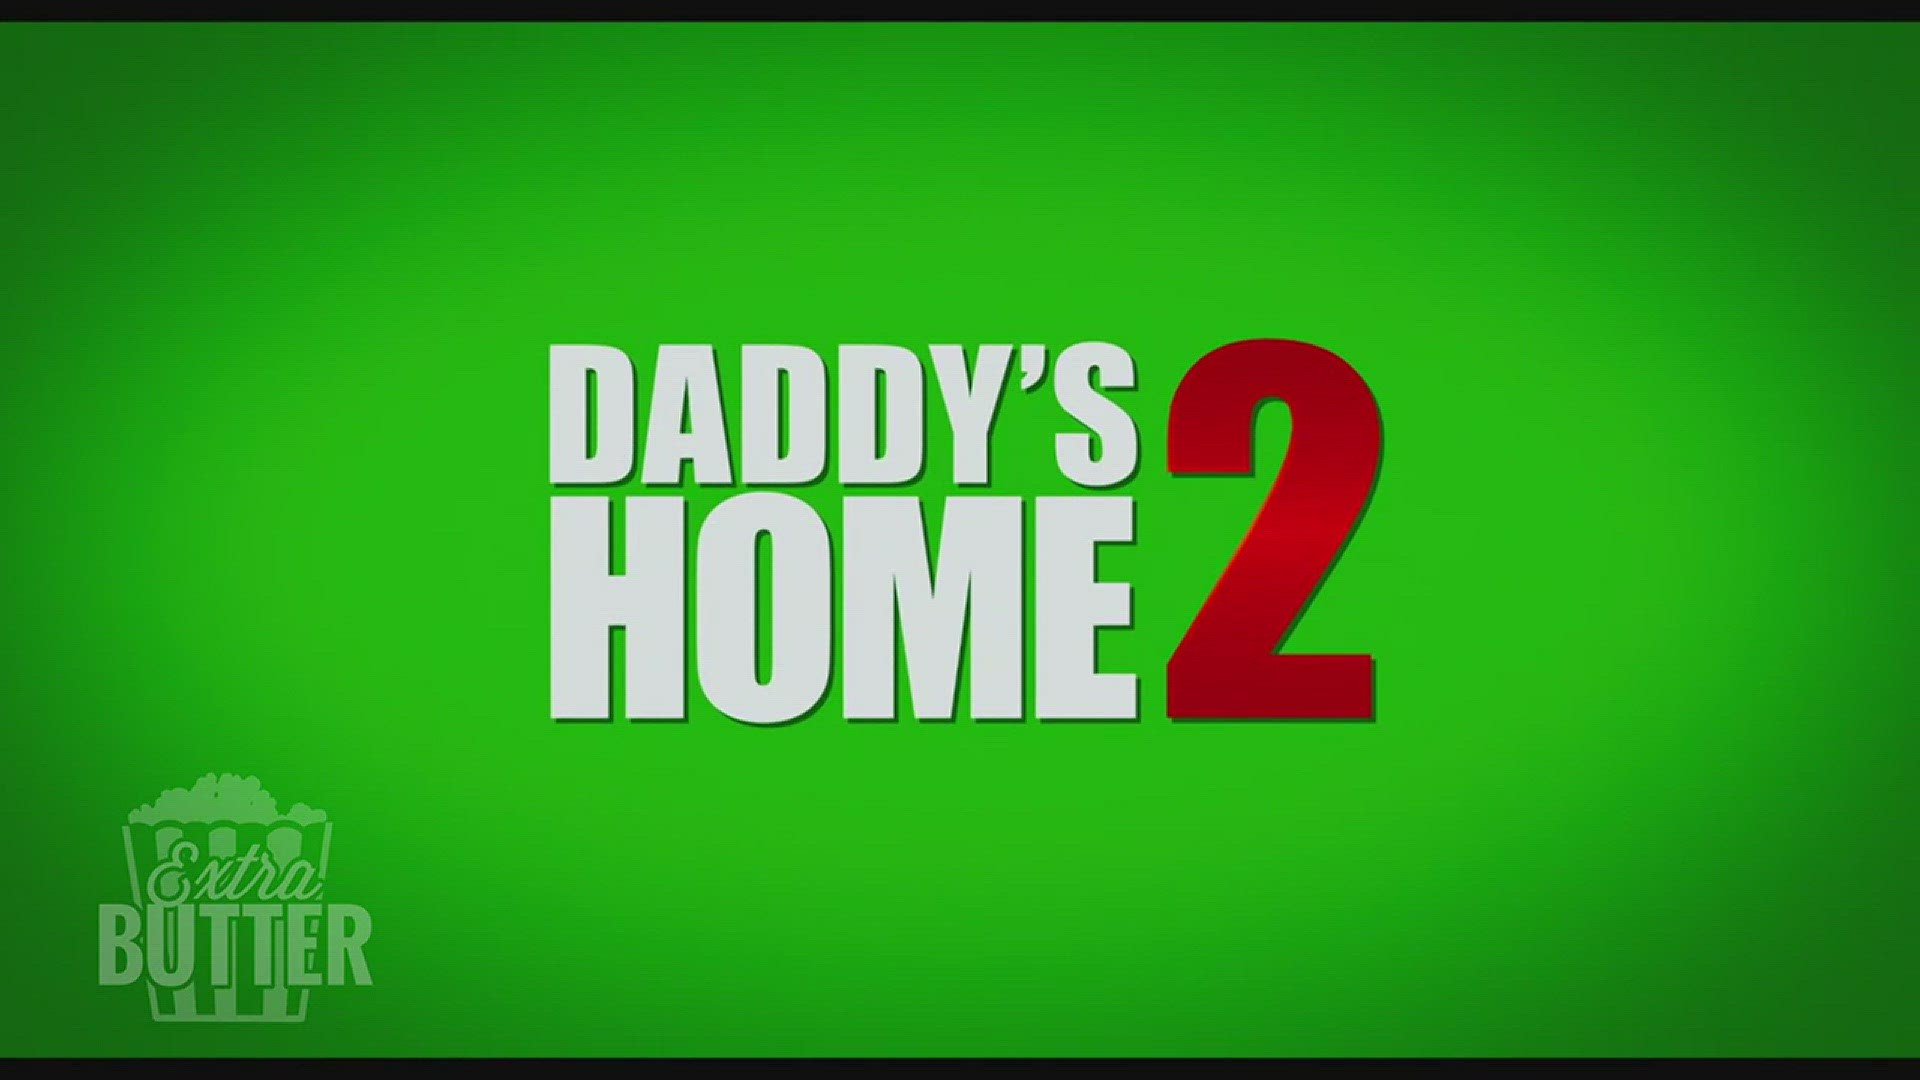 The gang preview "Daddy's Home 2" and think it's a great family film for the holidays.